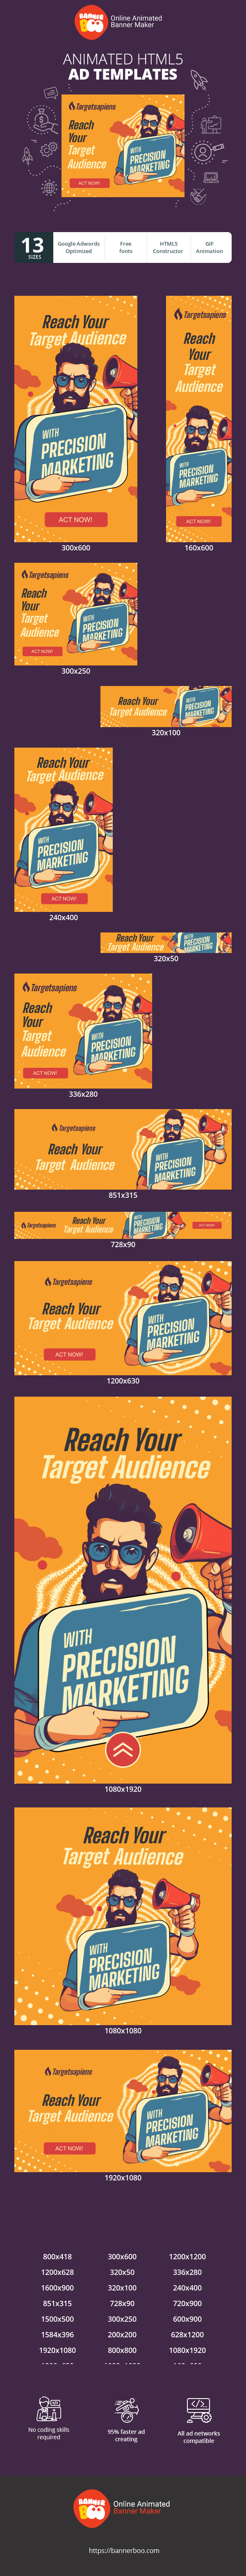 Szablon reklamy banerowej — Reach Your Target Audience with Precision Marketing — Agencies